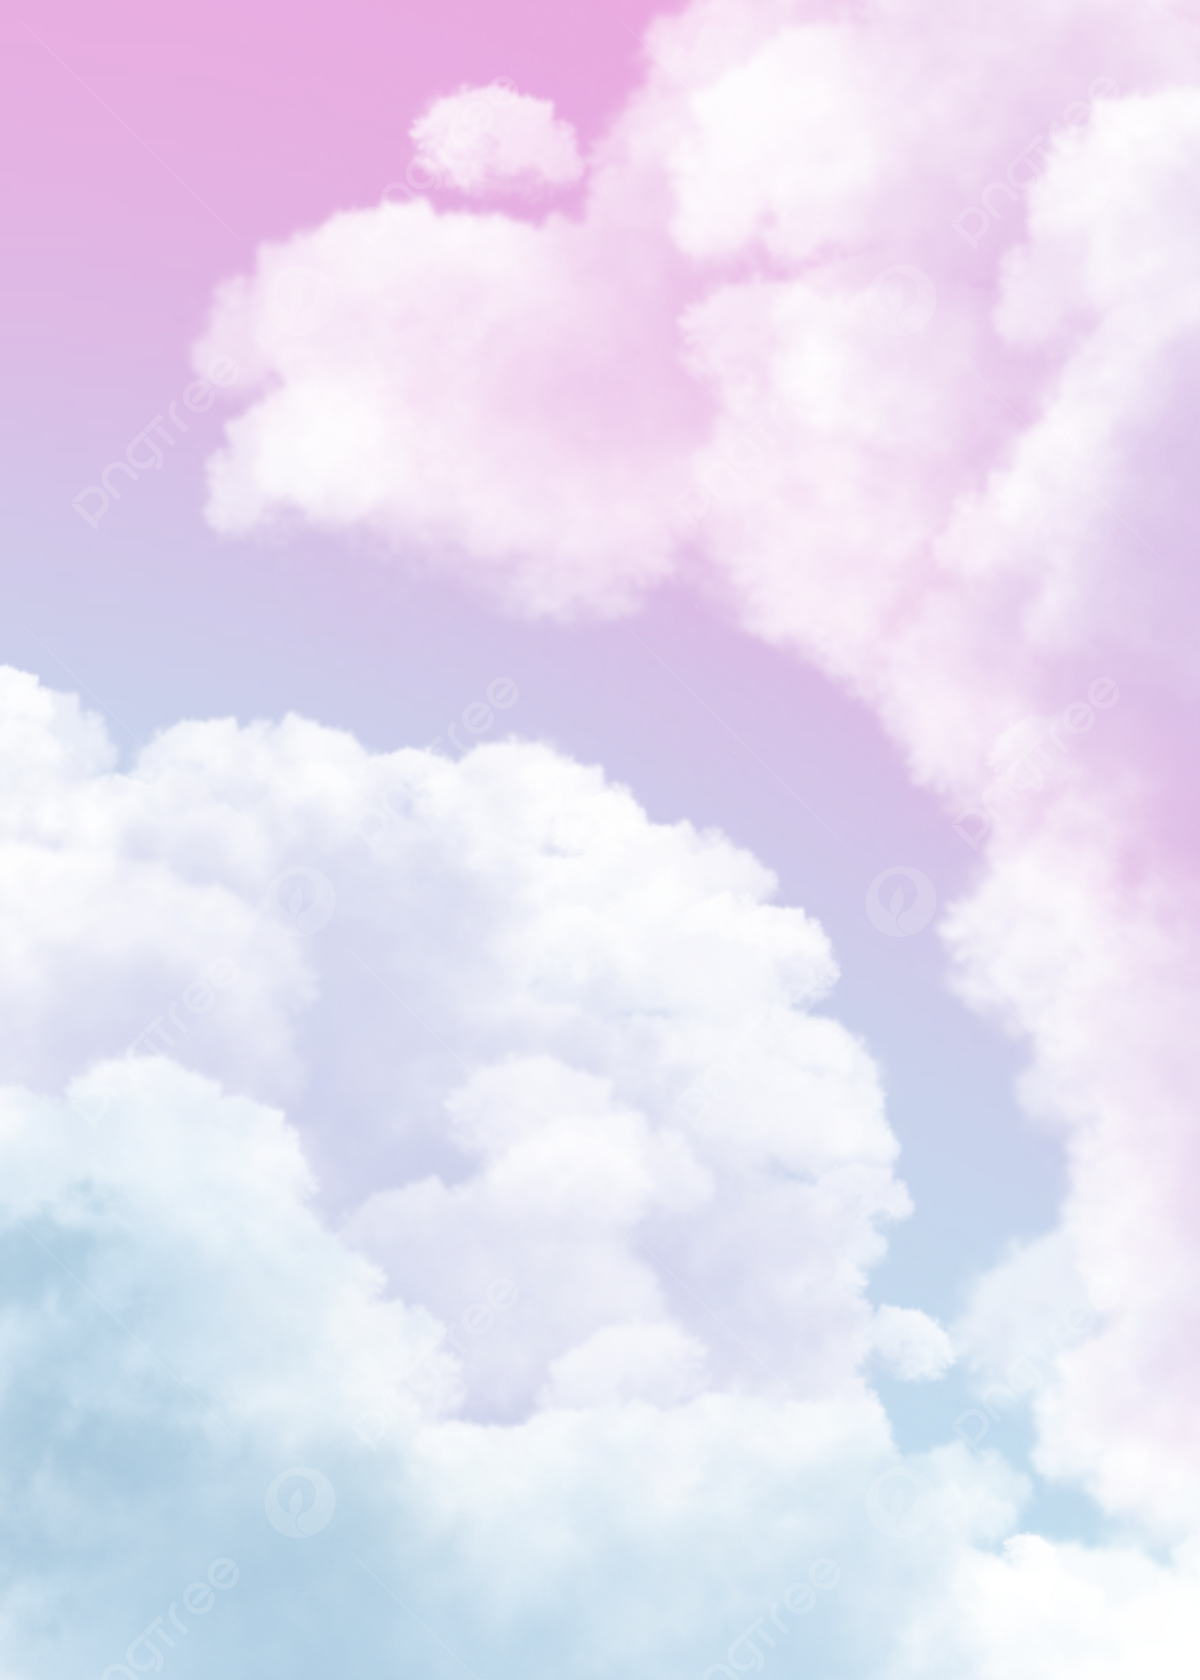 Pink Blue Dream Sky Cloud Background Wallpaper Image For Free Download